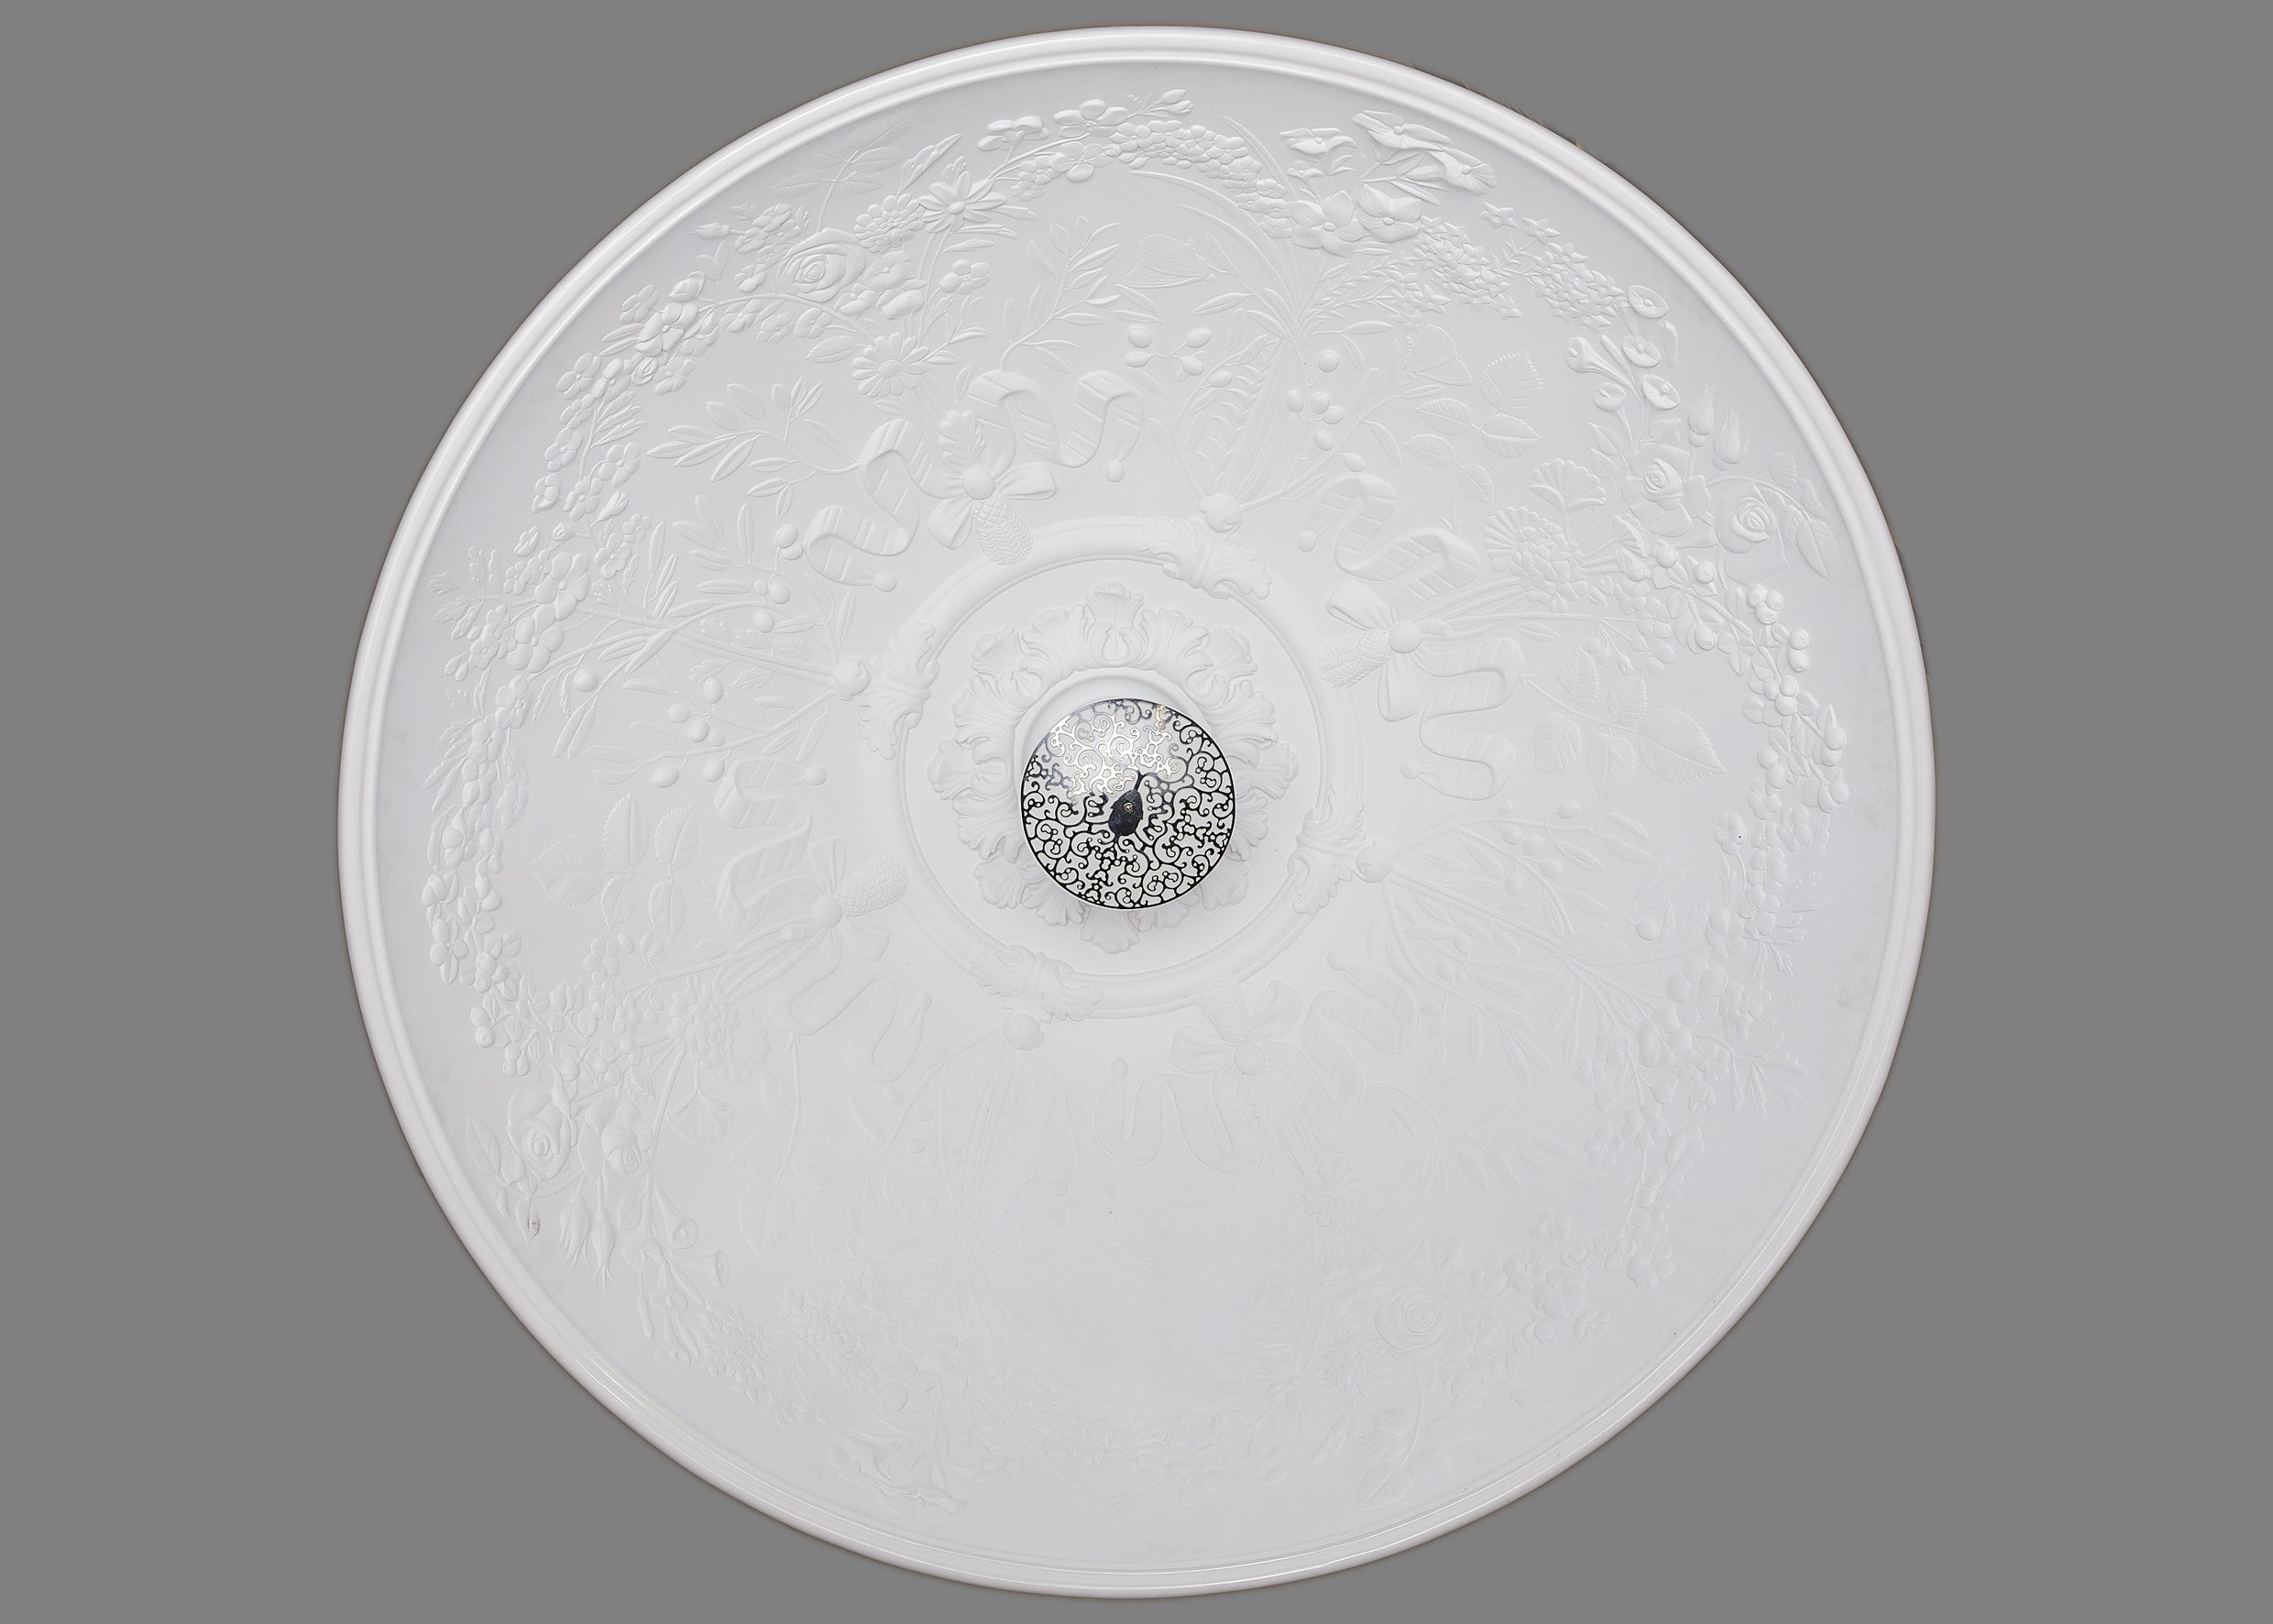 Marcel Wanders, Skygarden pendant lamp,
shiny white aluminum covered with white plaster,
sculpted Edition Flos,
circa 2000, Holland, Netherlands.
Height 46 cm, diameter 91.5 cm.

Fantasy, poetry and audacity, these are what most characterize the